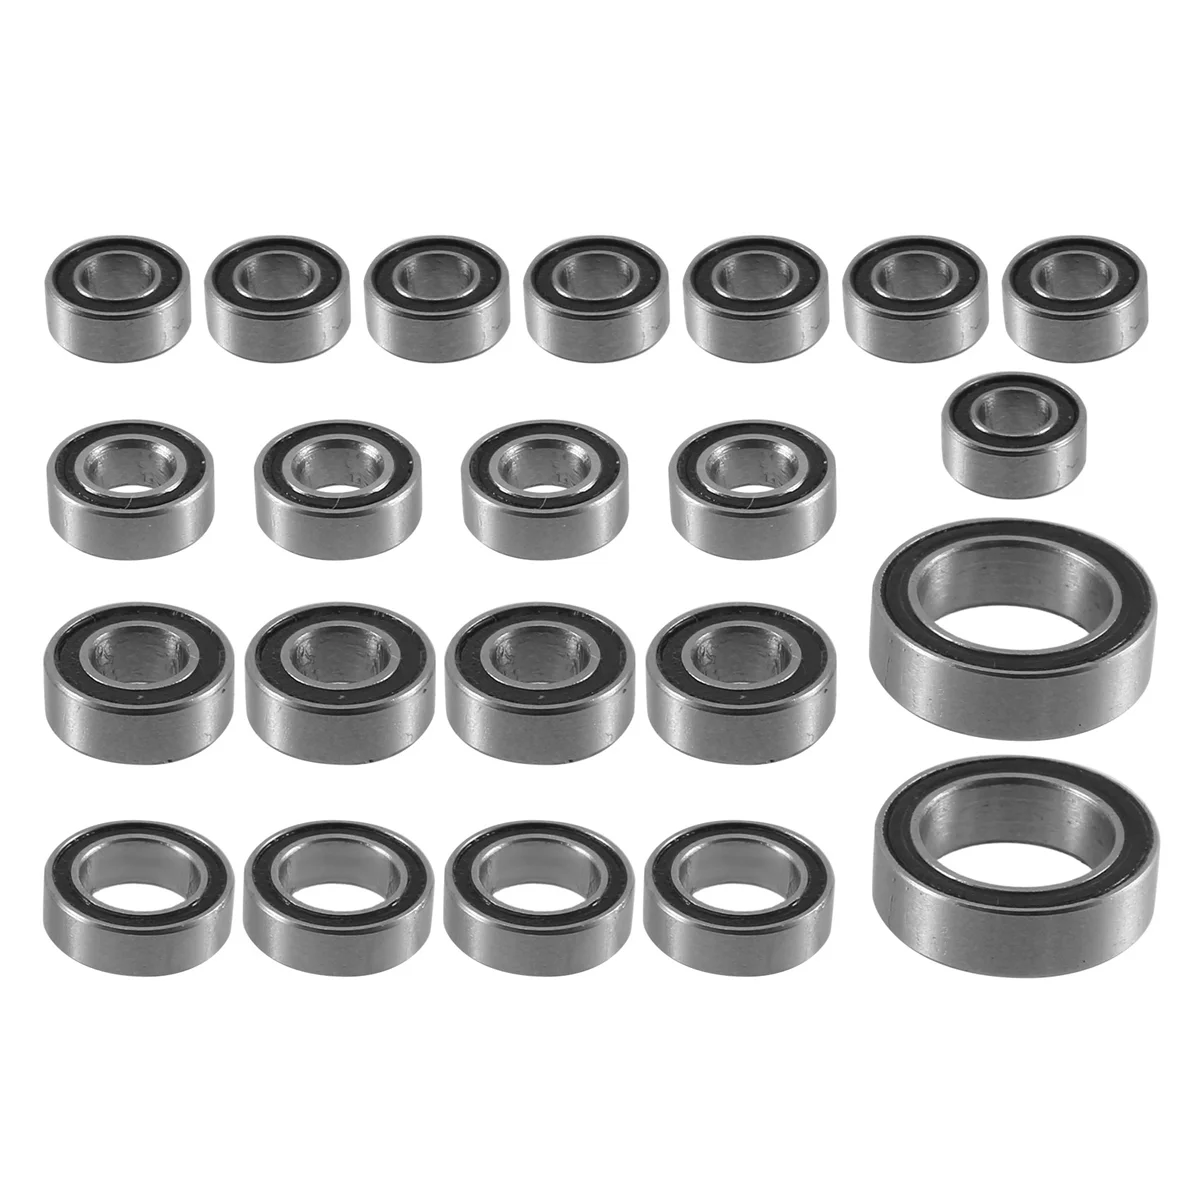 

22Pcs Steel Sealed Bearing Kit 9745 for Traxxas TRX4M TRX4-M 1/18 RC Crawler Car Upgrade Parts Accessories